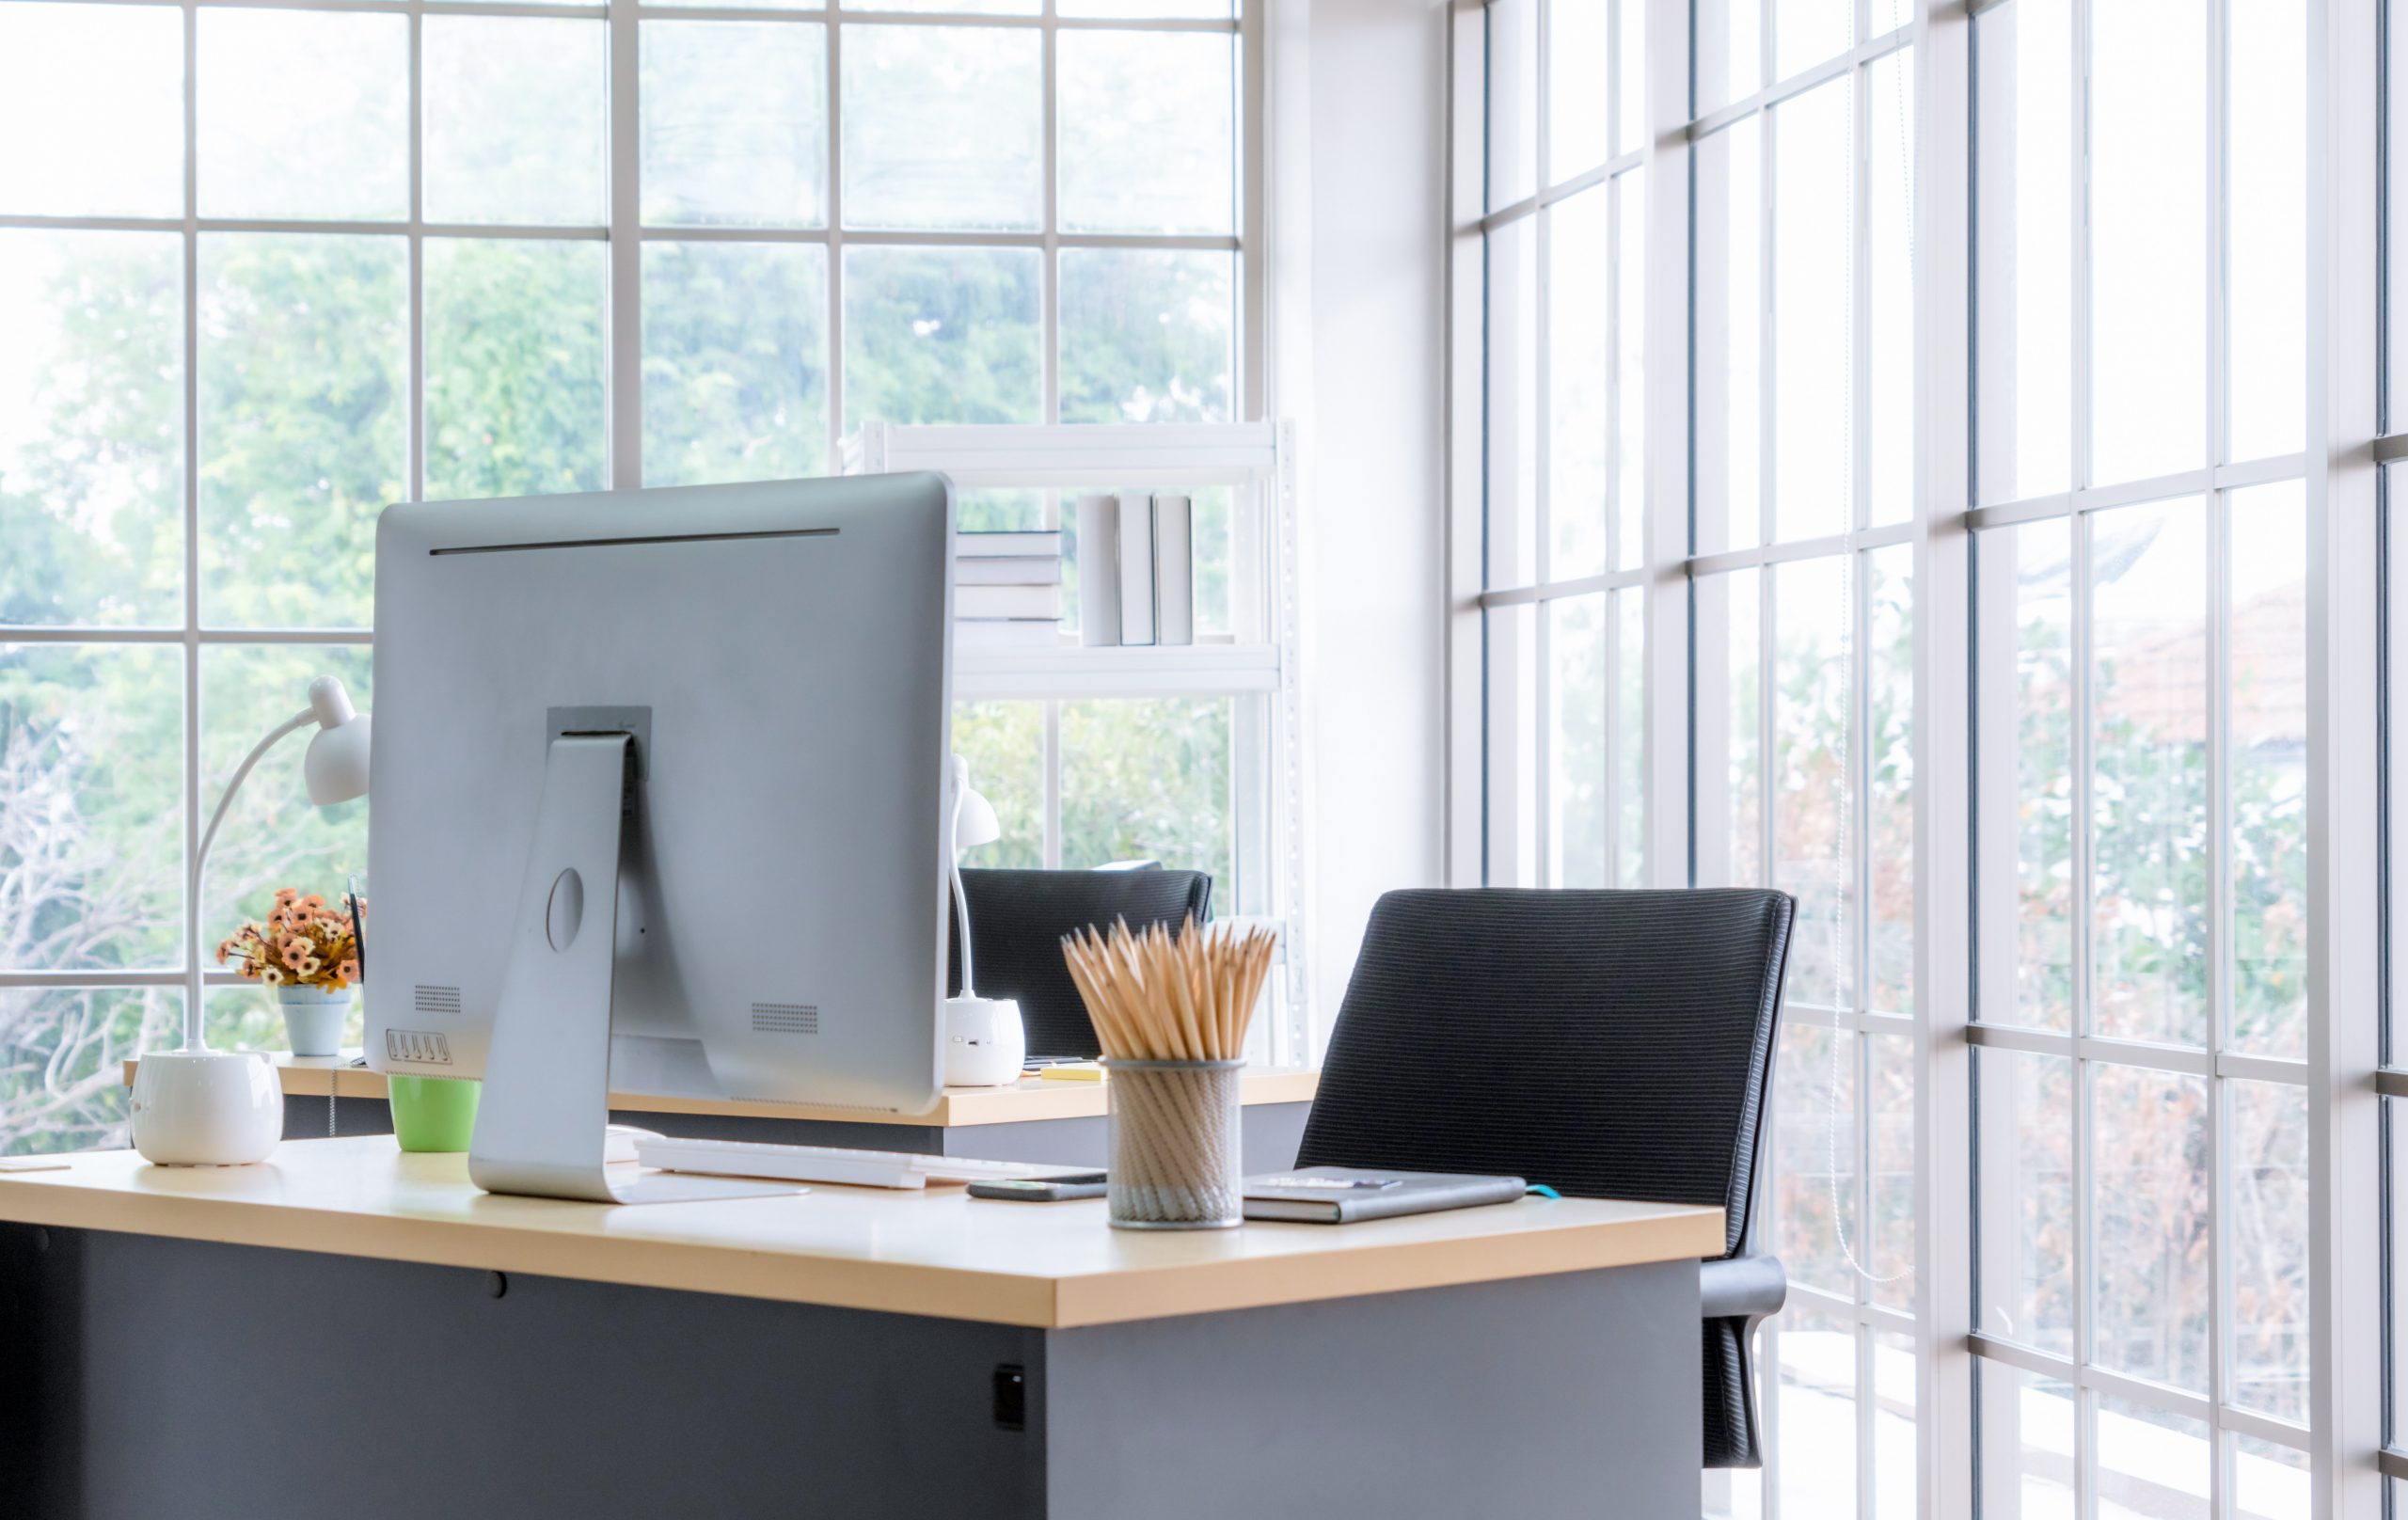 How to Choose the Right Window Film for your Home Office?